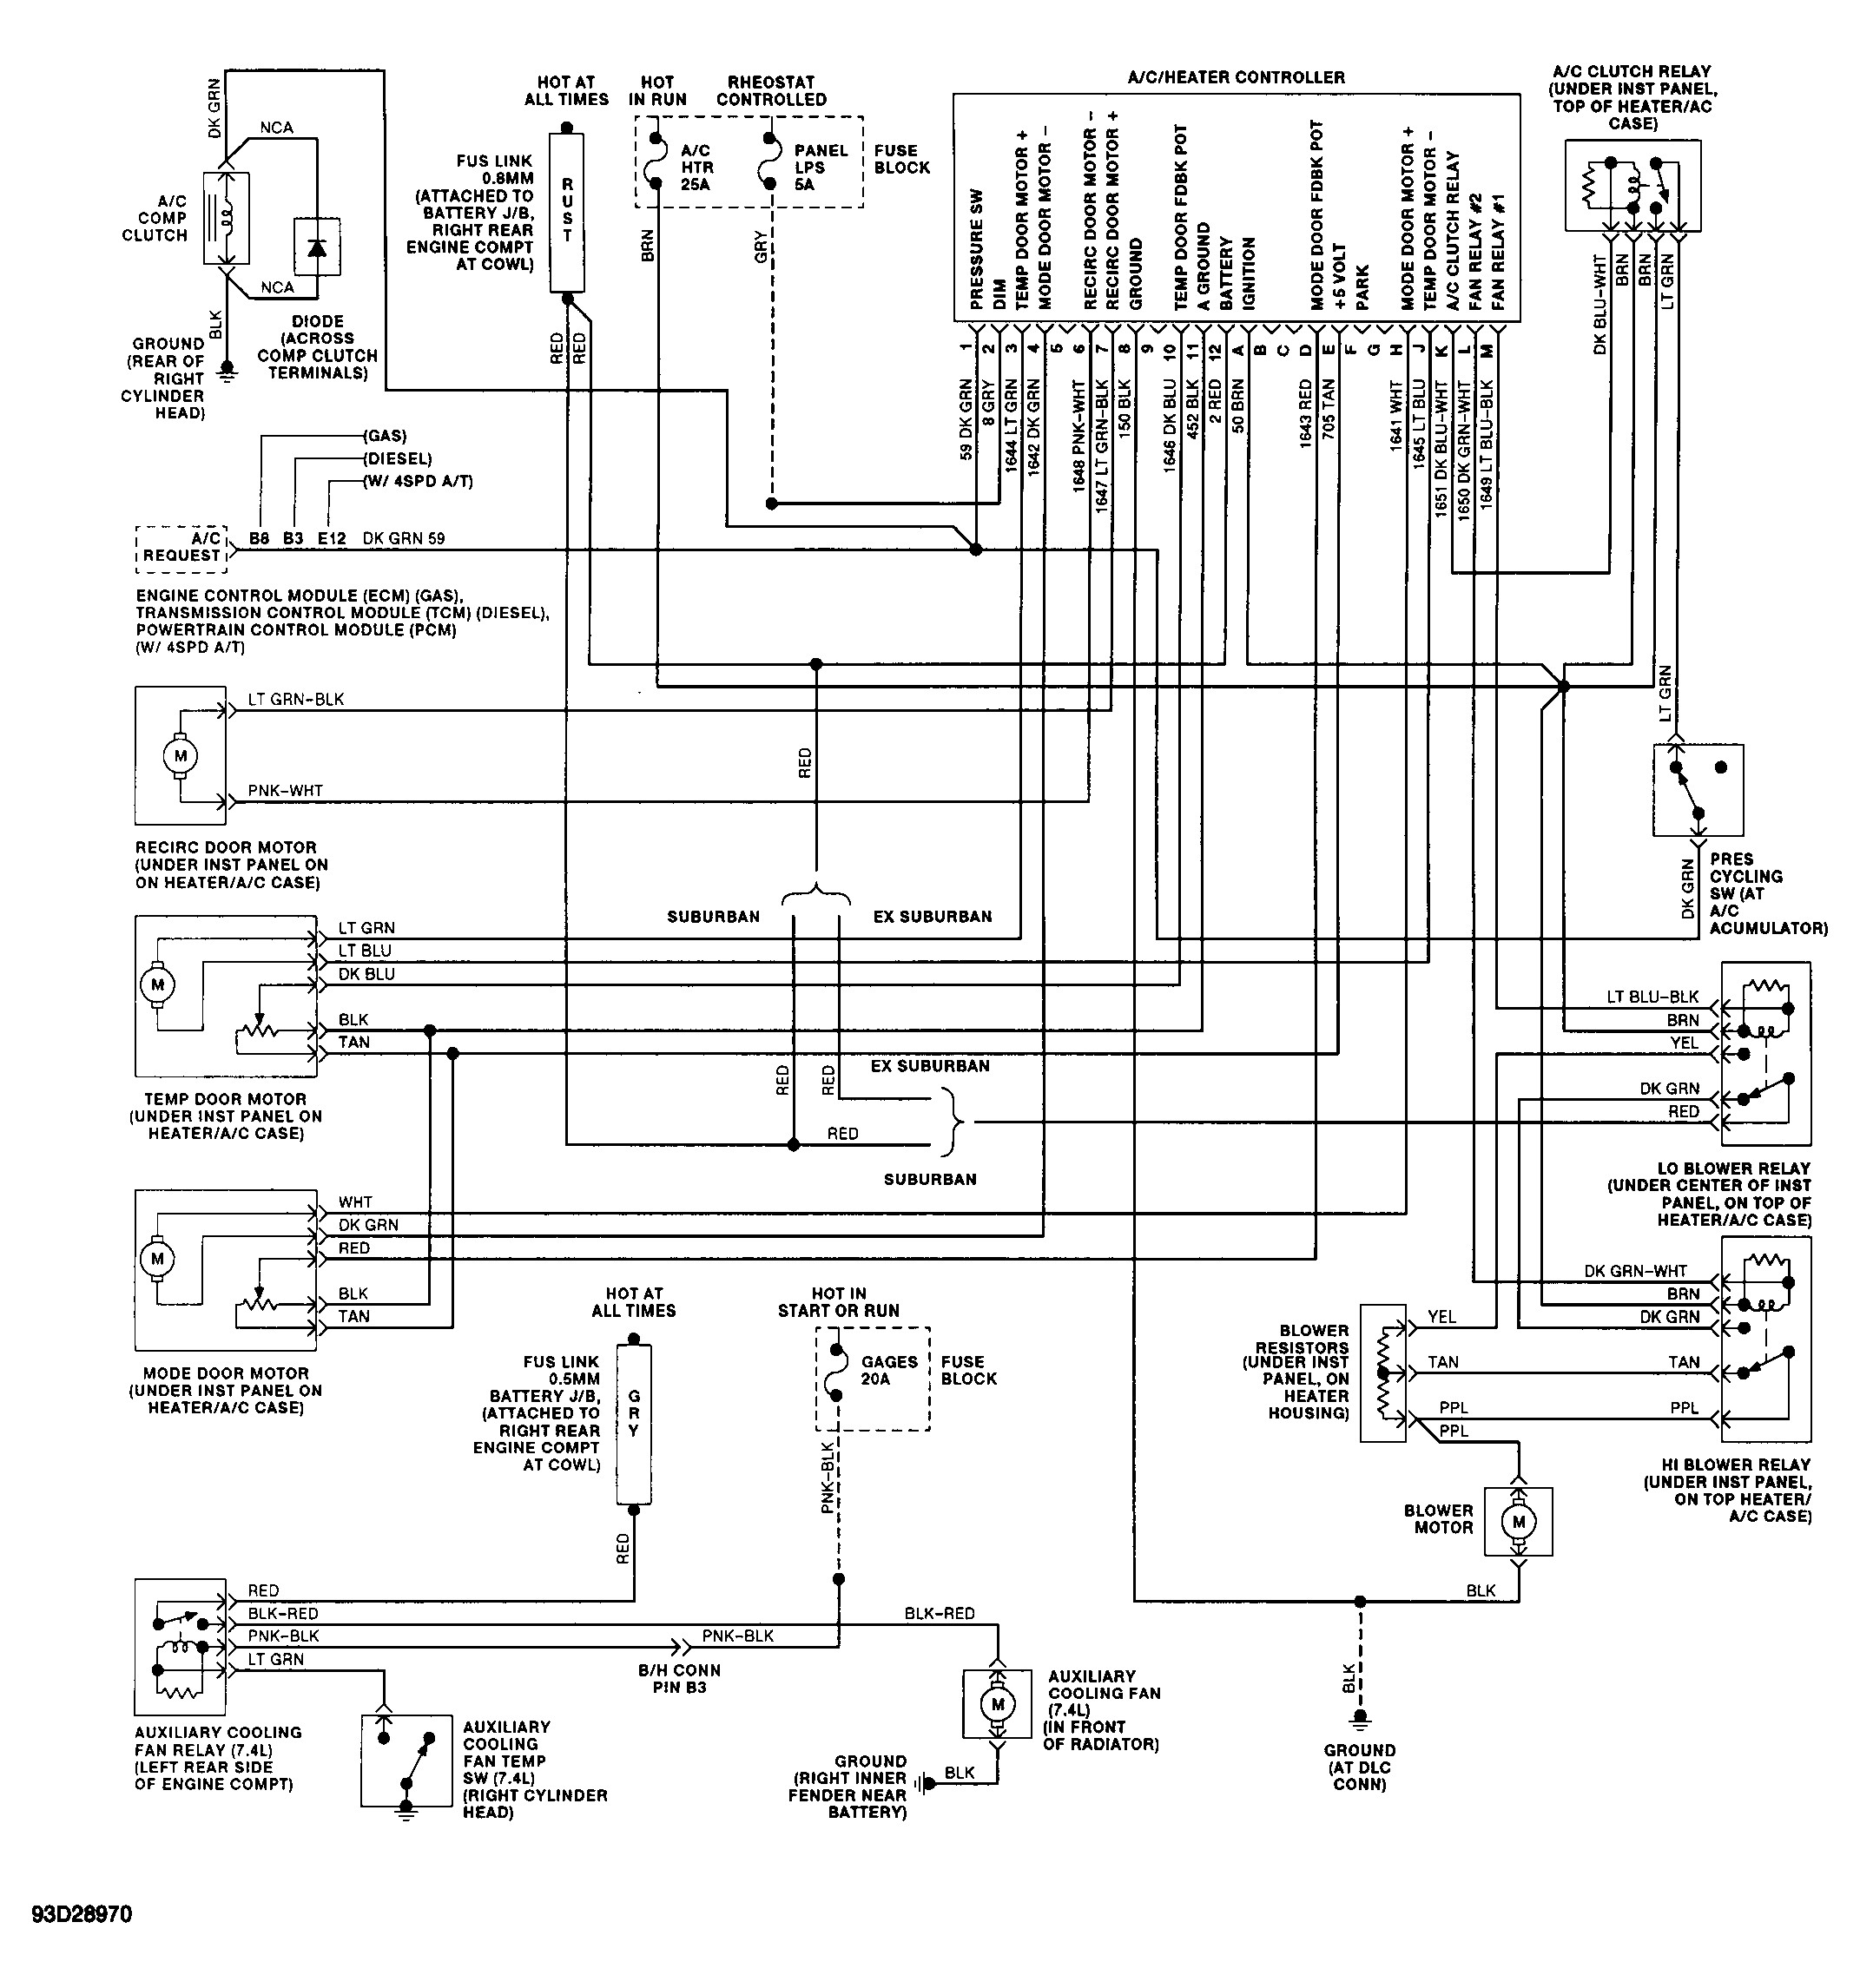 Radiator System Diagram 94 Chevy 4wd Shift Actuator Location Wiring Diagram S for Help Of Radiator System Diagram